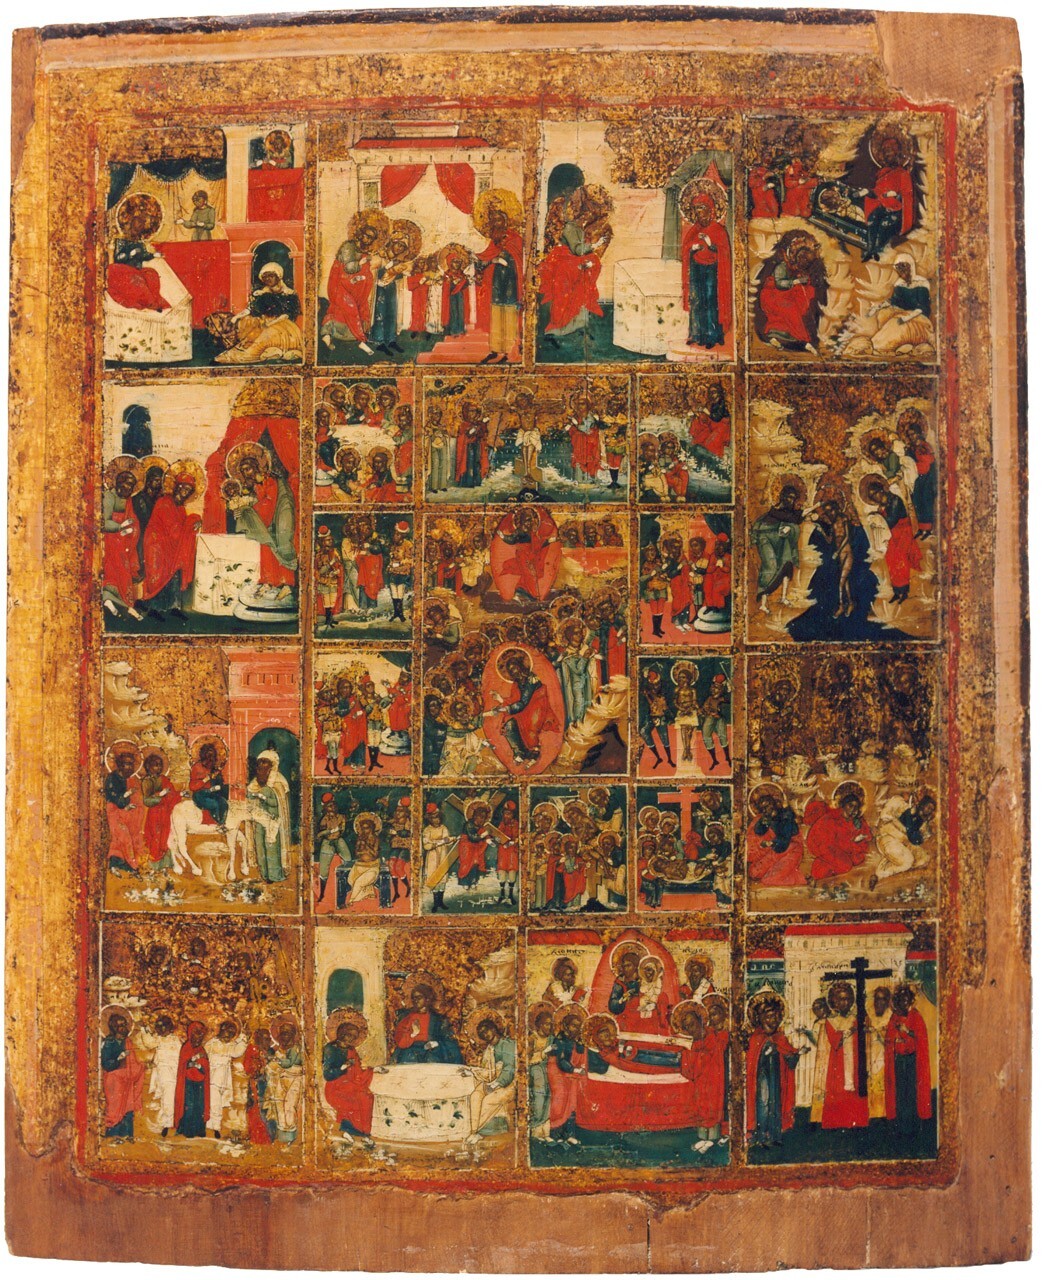 Resurrection, scenes from the Passion, and twelve feasts